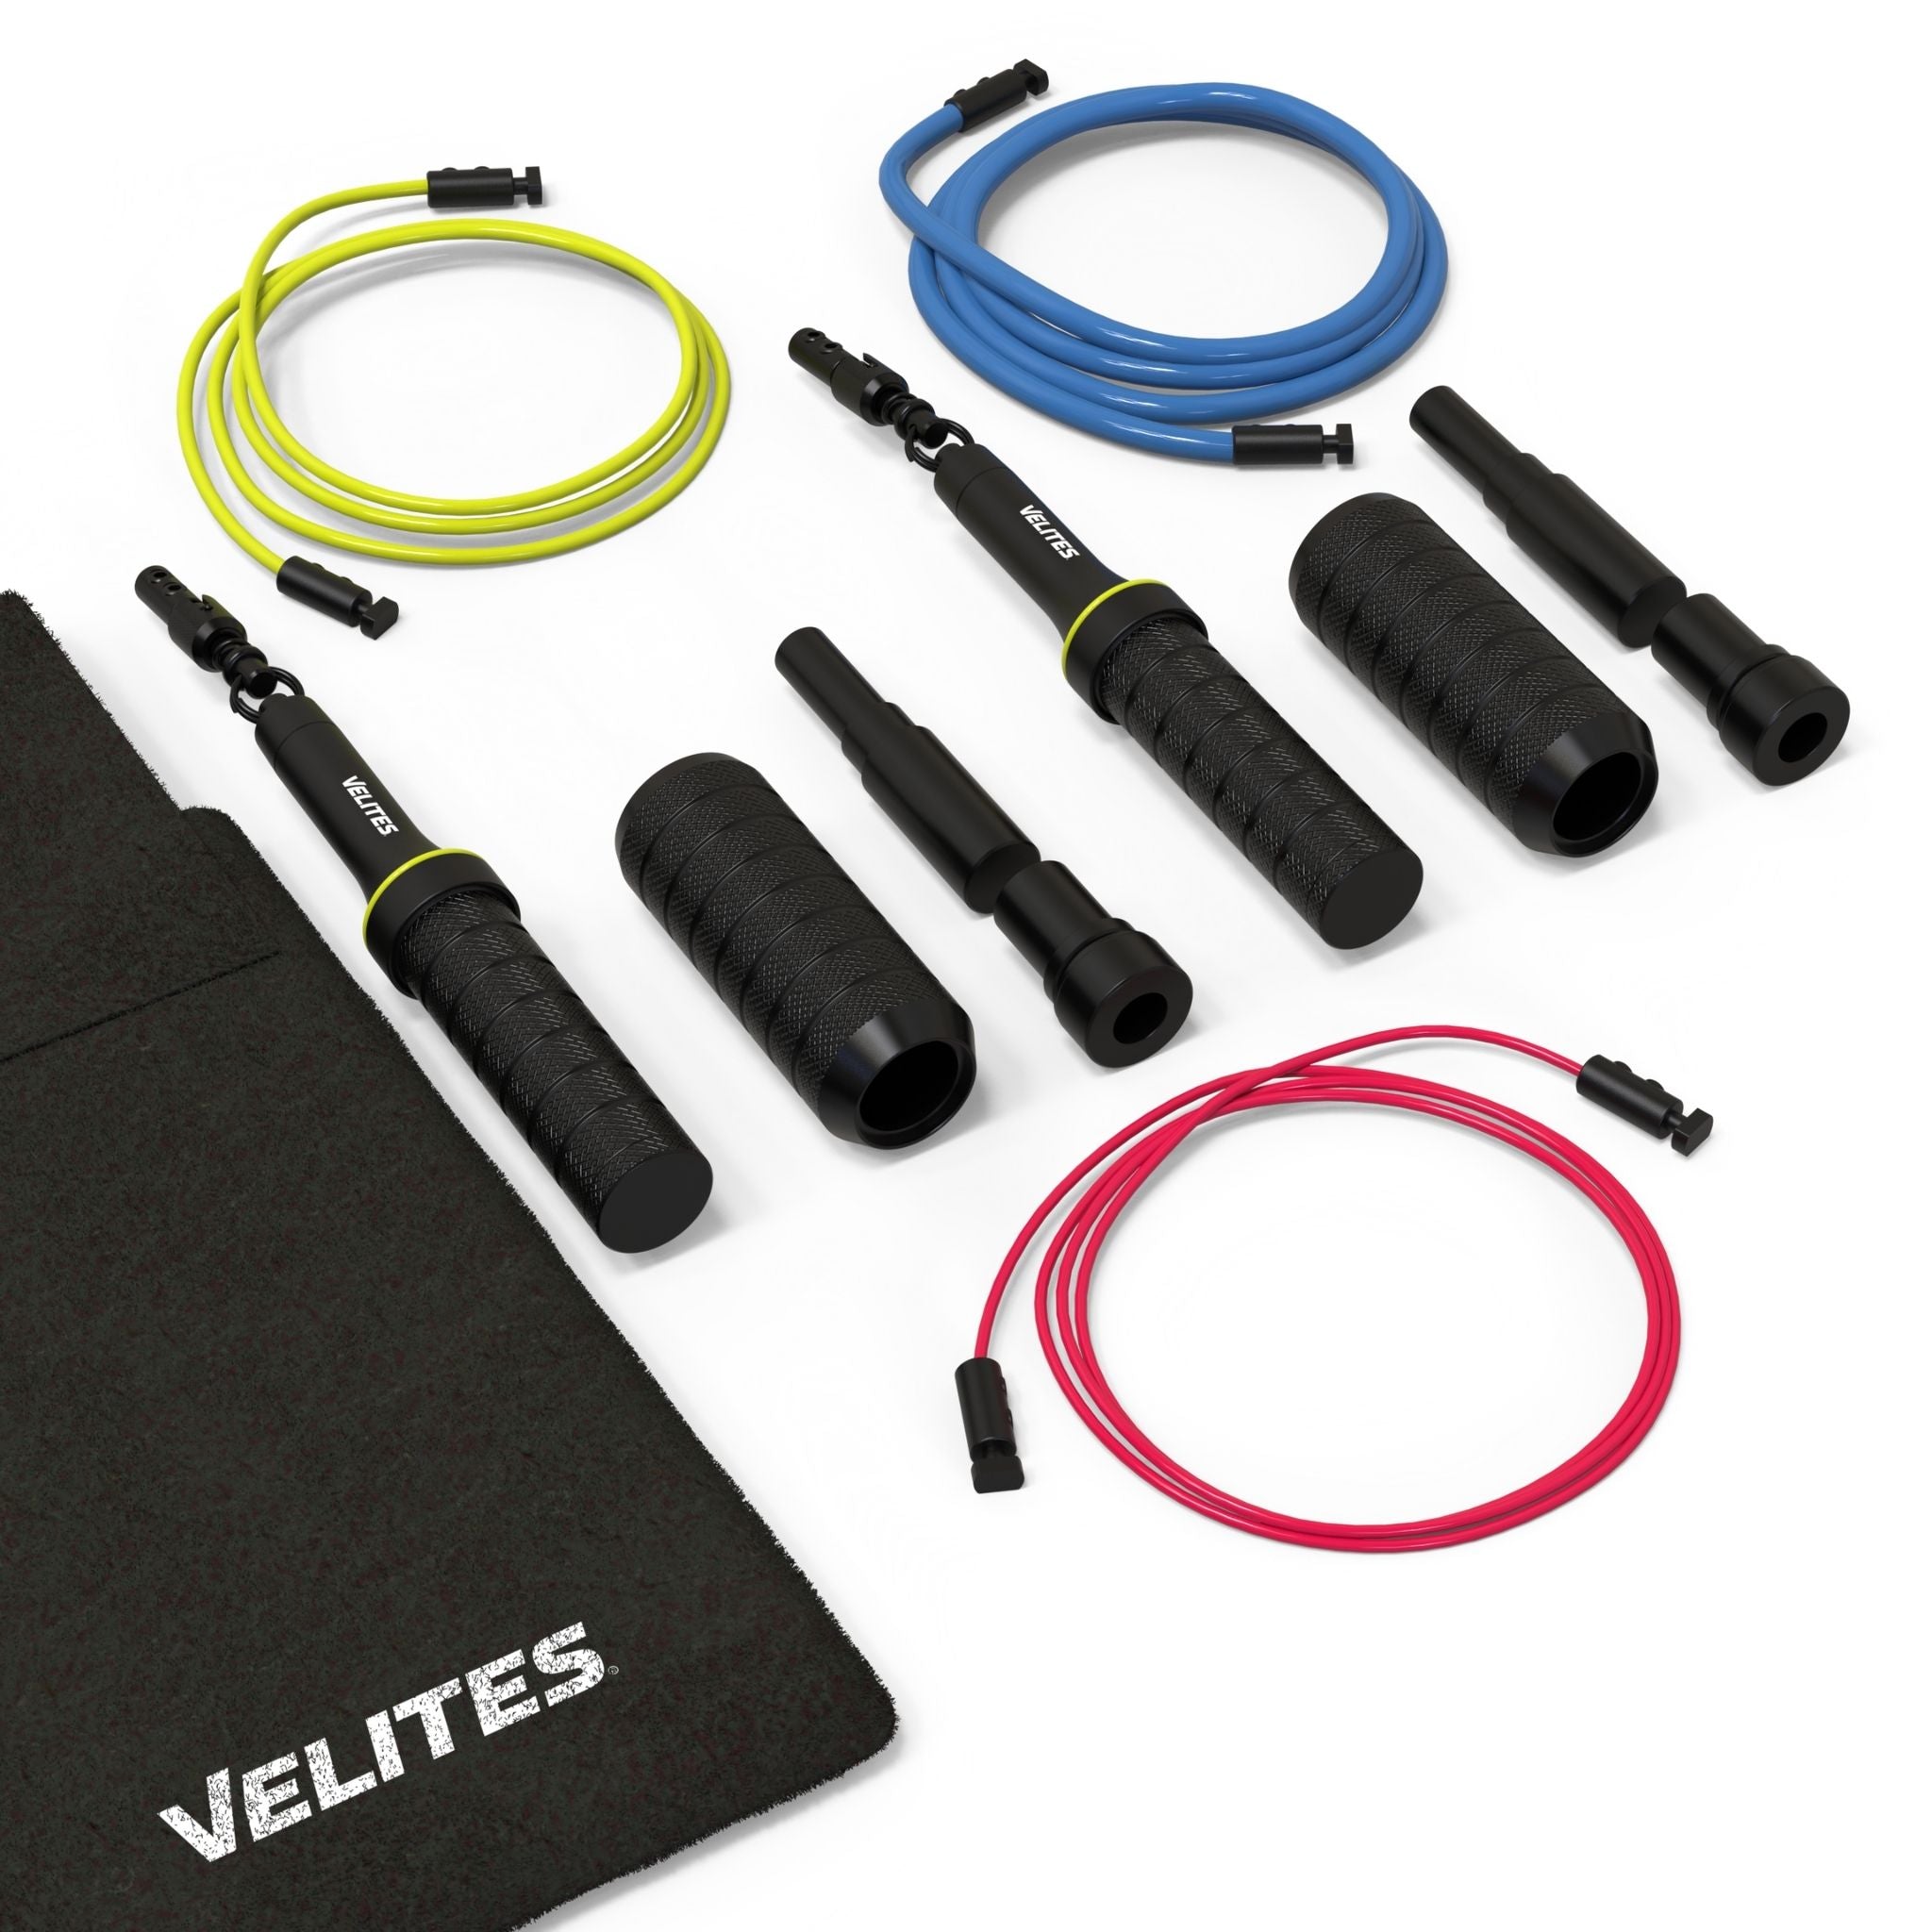 Pack Comba Earth 2.0 Velites + Lastres + Cables + Mat - negro - 